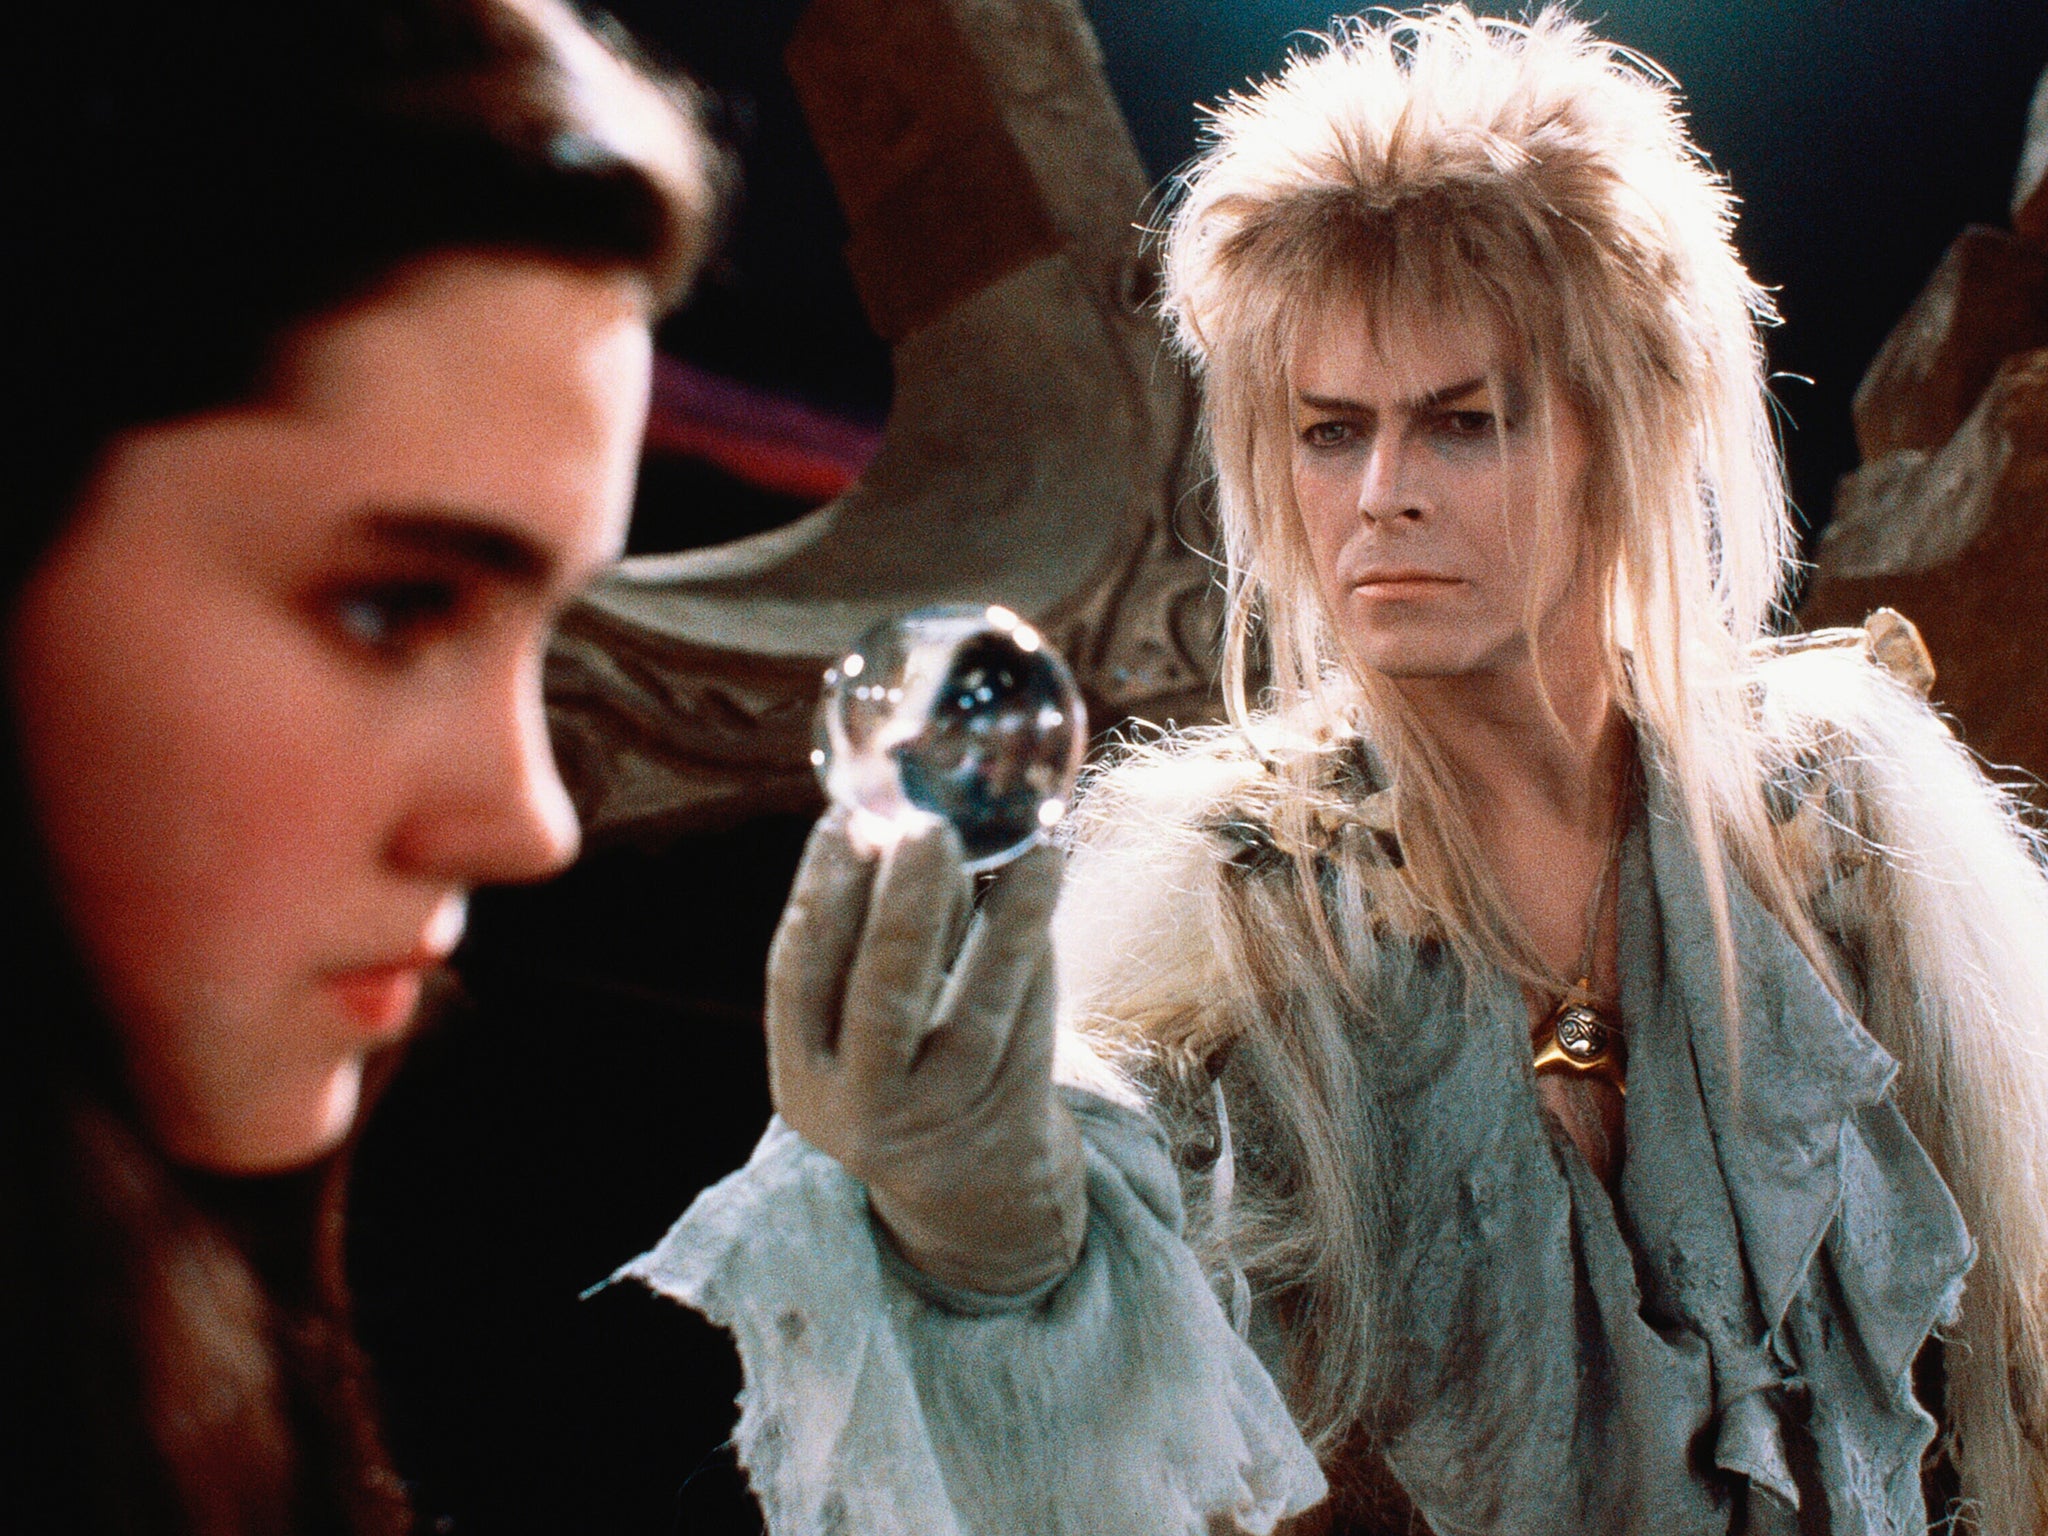 David Bowie as Jareth, the Goblin King in 'Labyrinth'